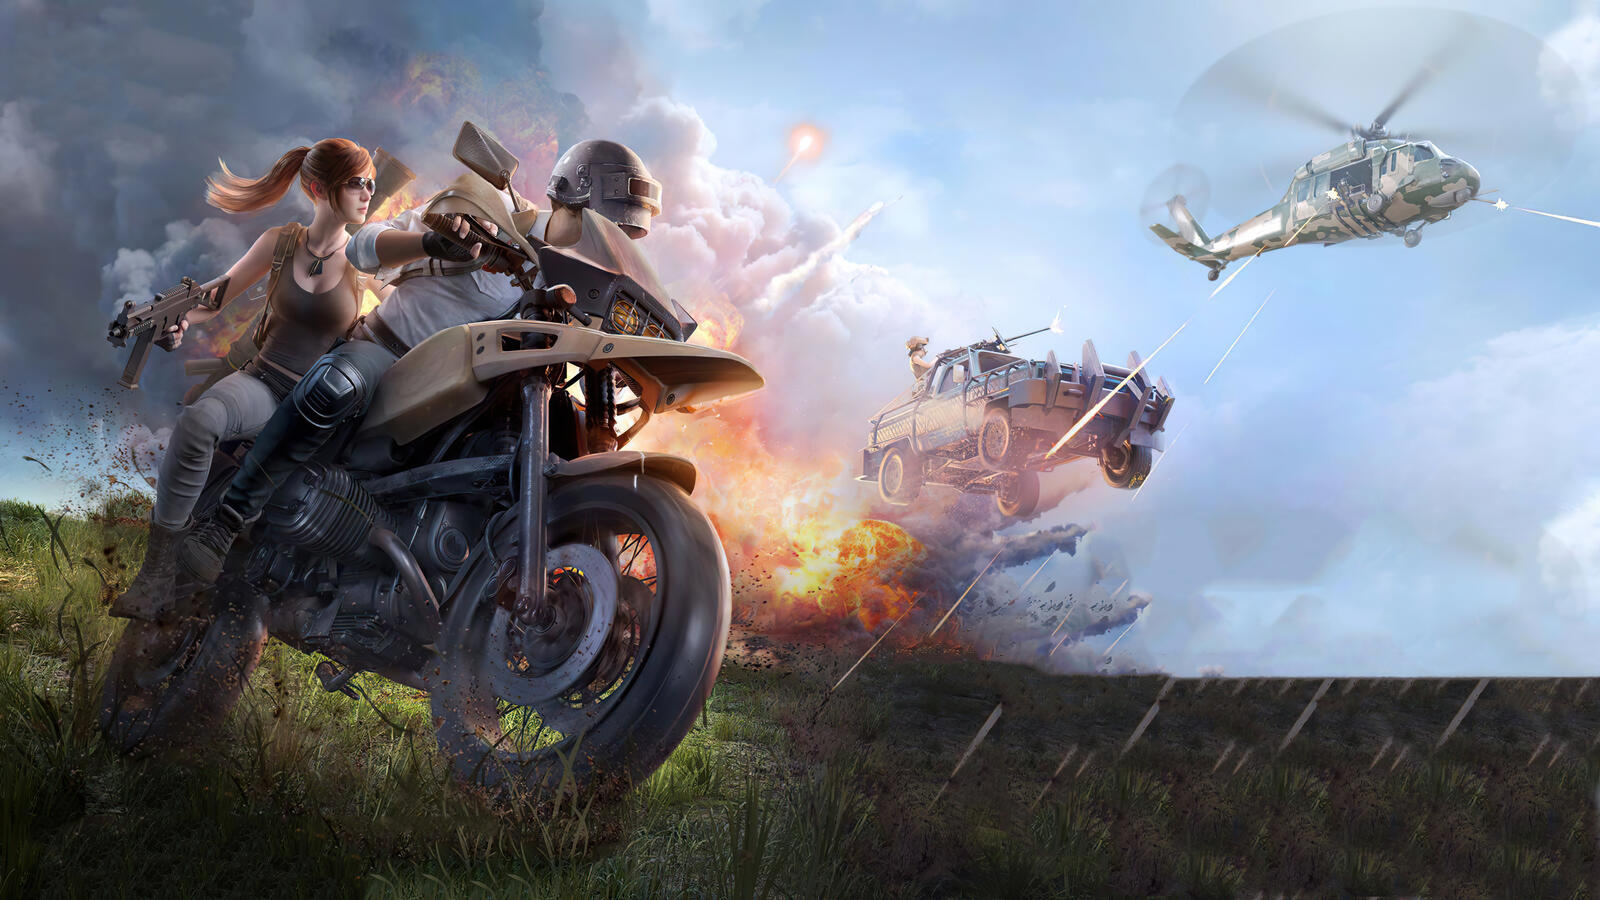 Wallpapers games Playerunknowns Battlegrounds motorcycle on the desktop